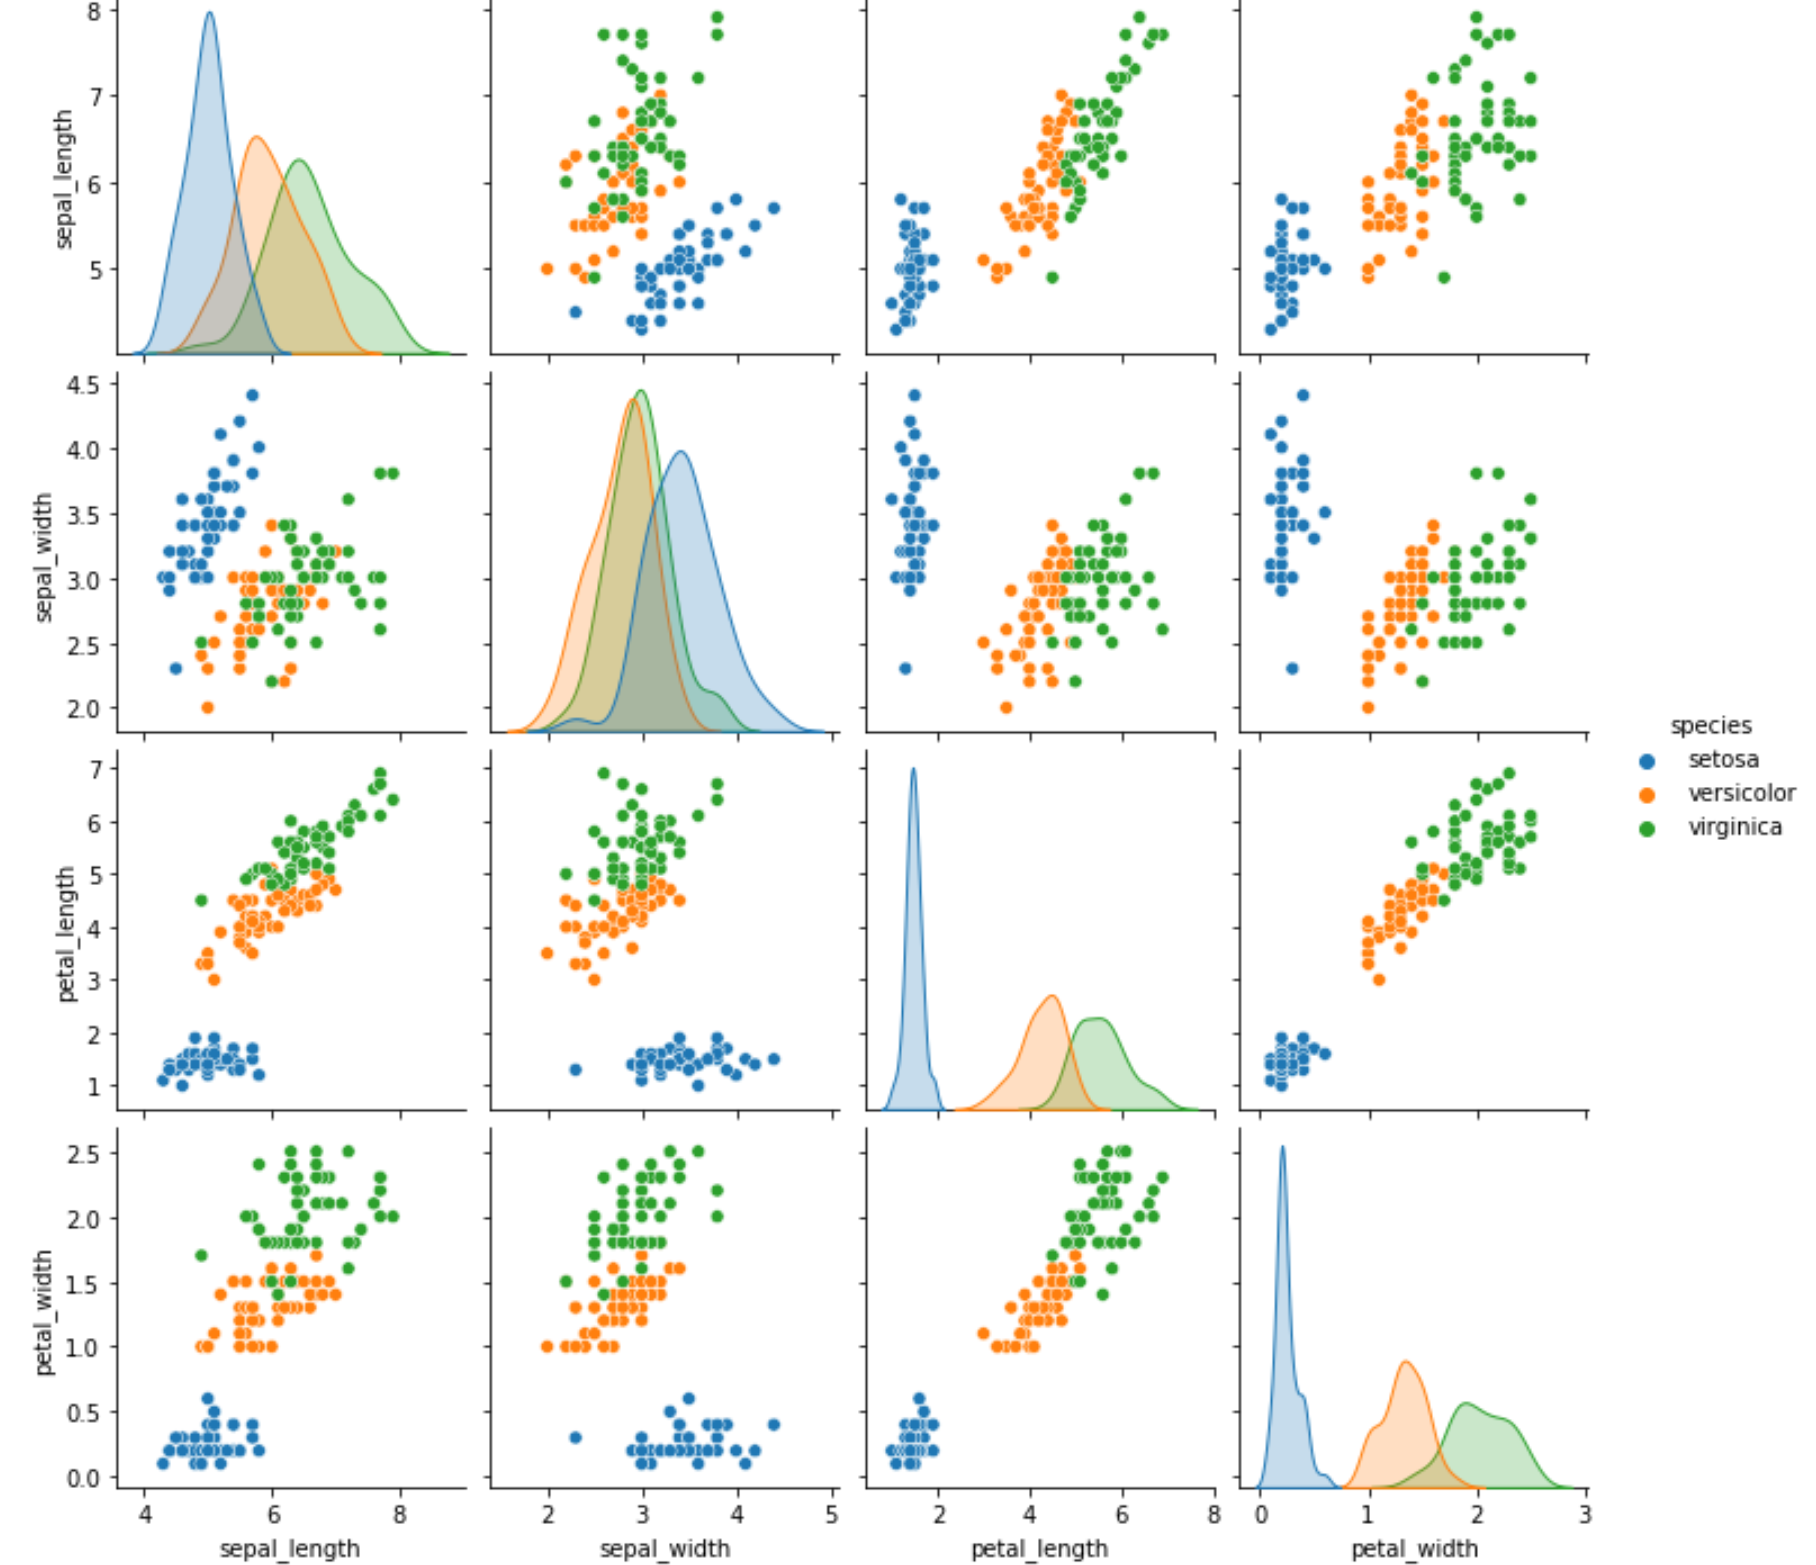 Pairs plot in Python with color by category